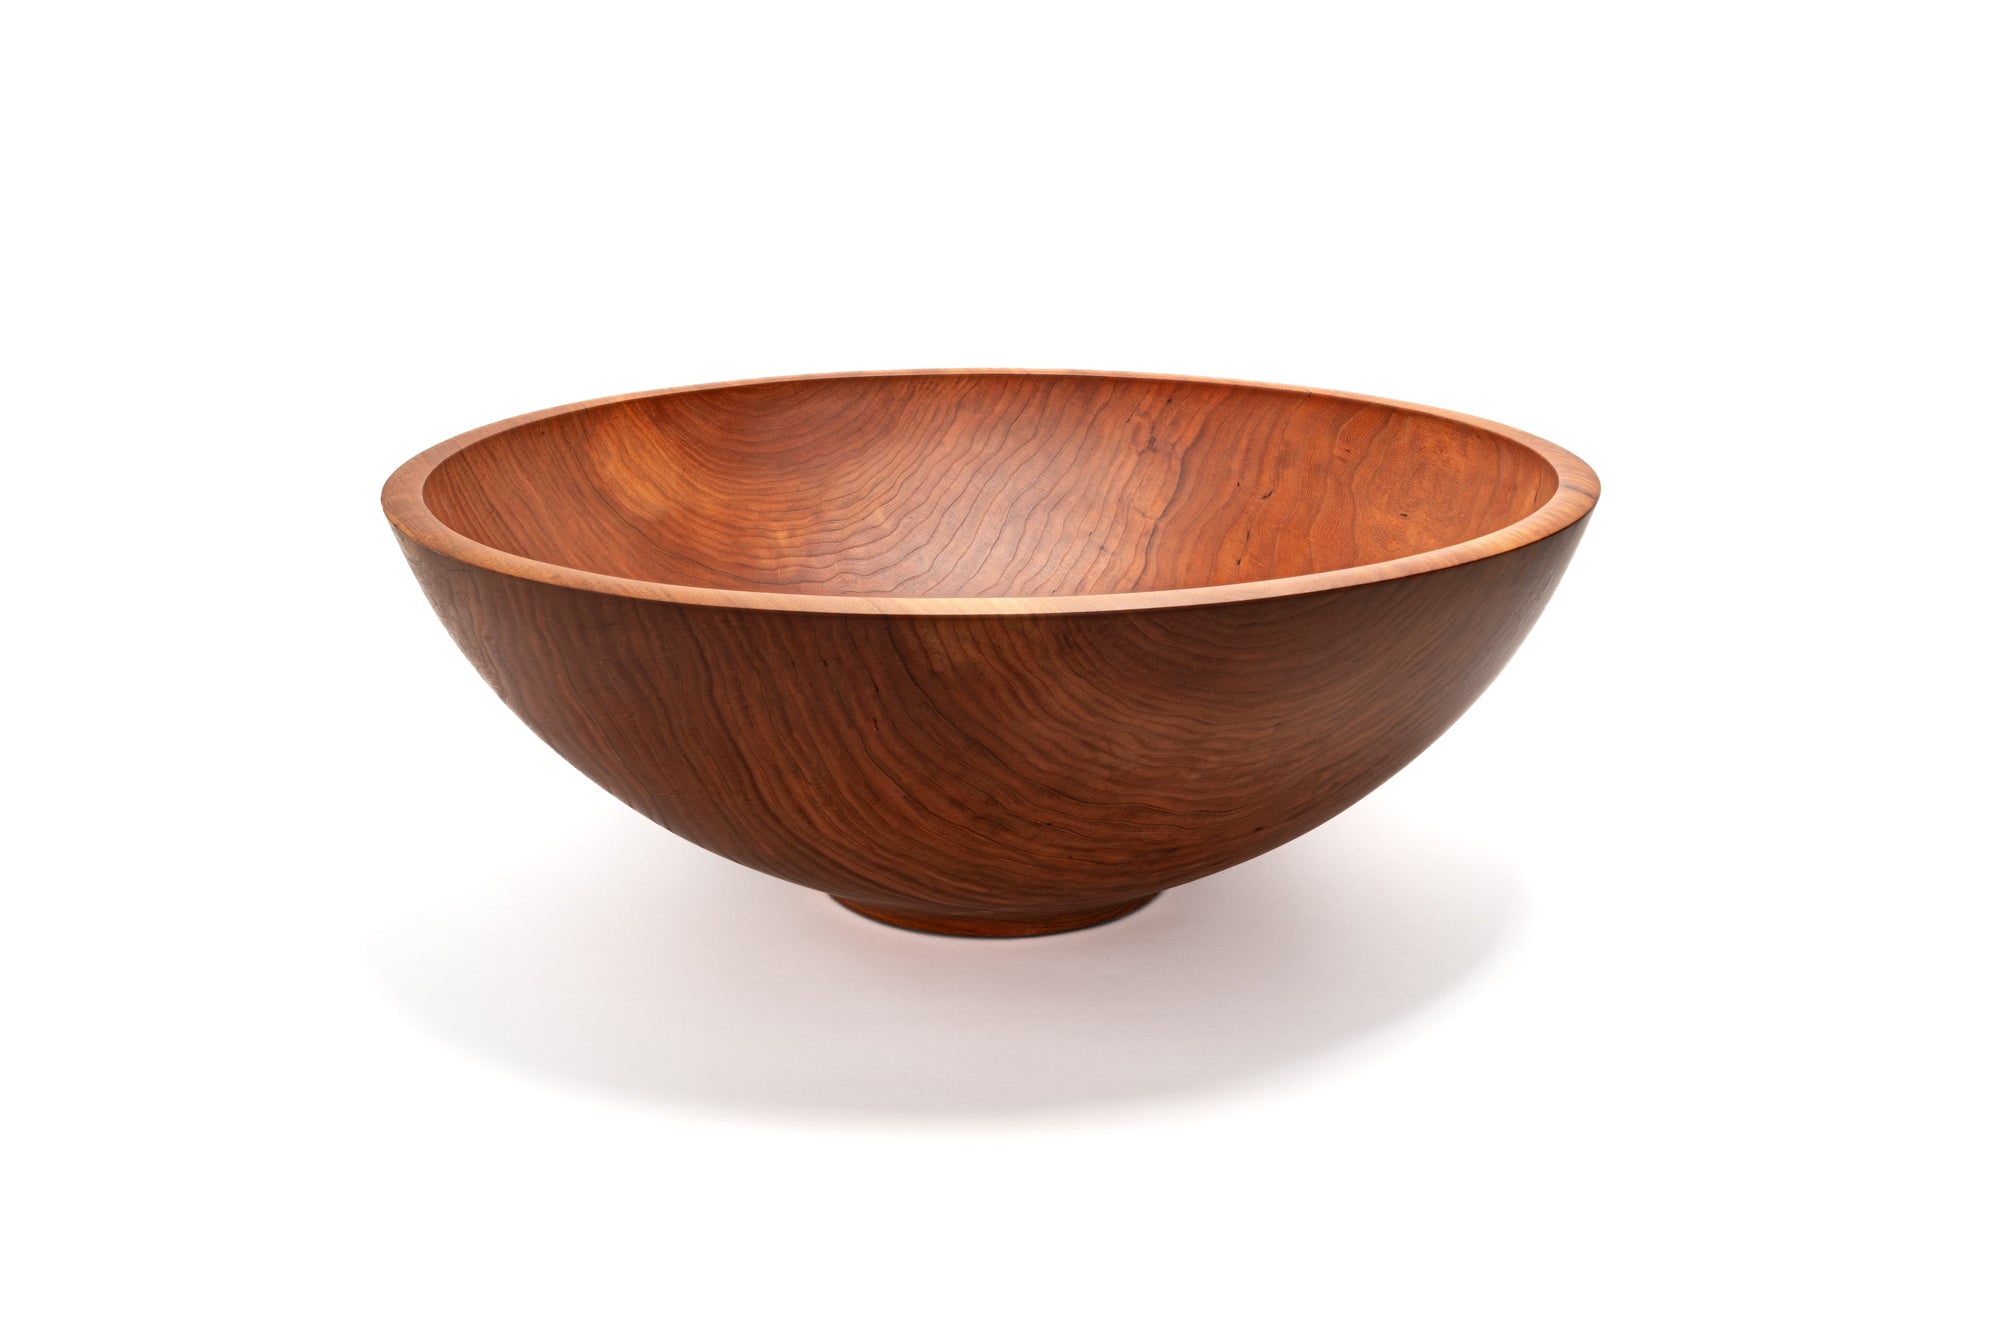 A Classic Wood Serving Platter & Tray from Andrew Pearce Bowls in VT